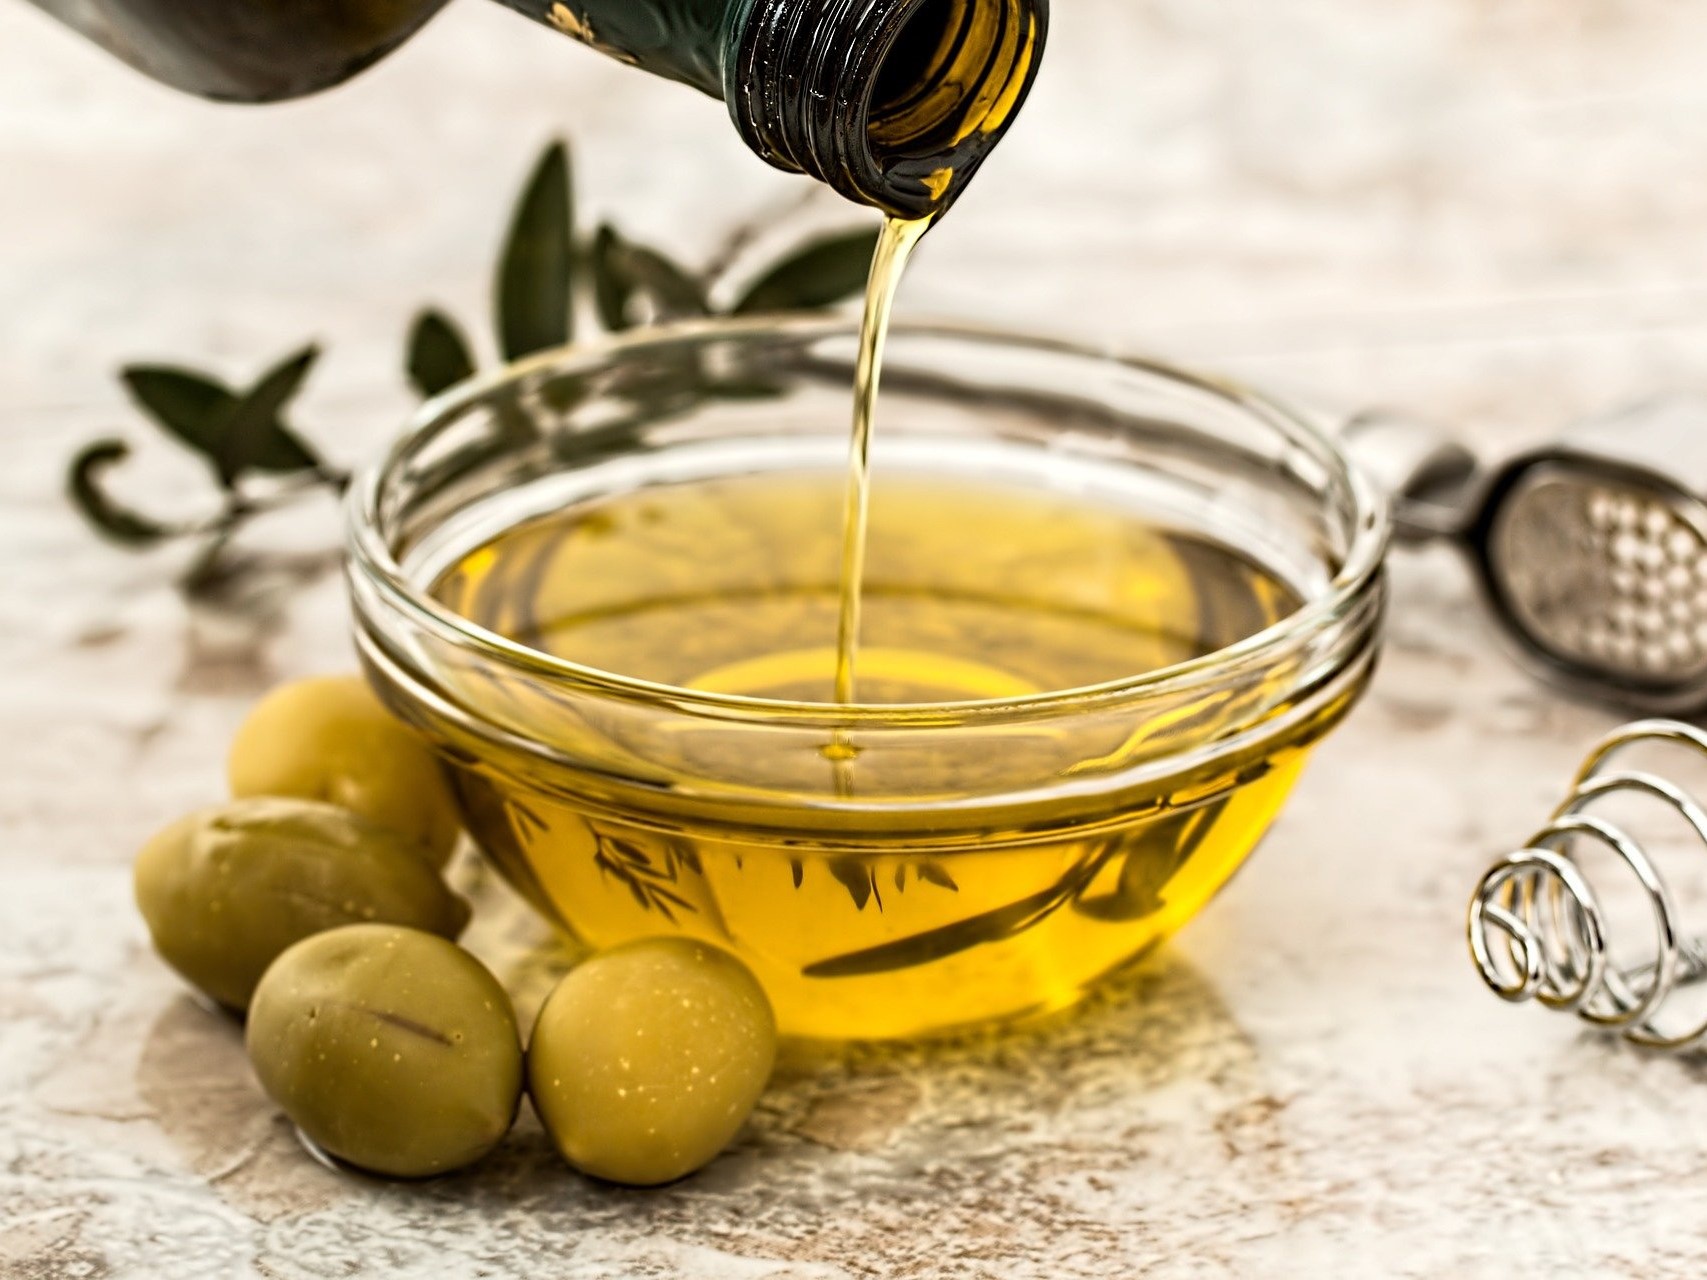 olive oil contains a lot of polyphenols